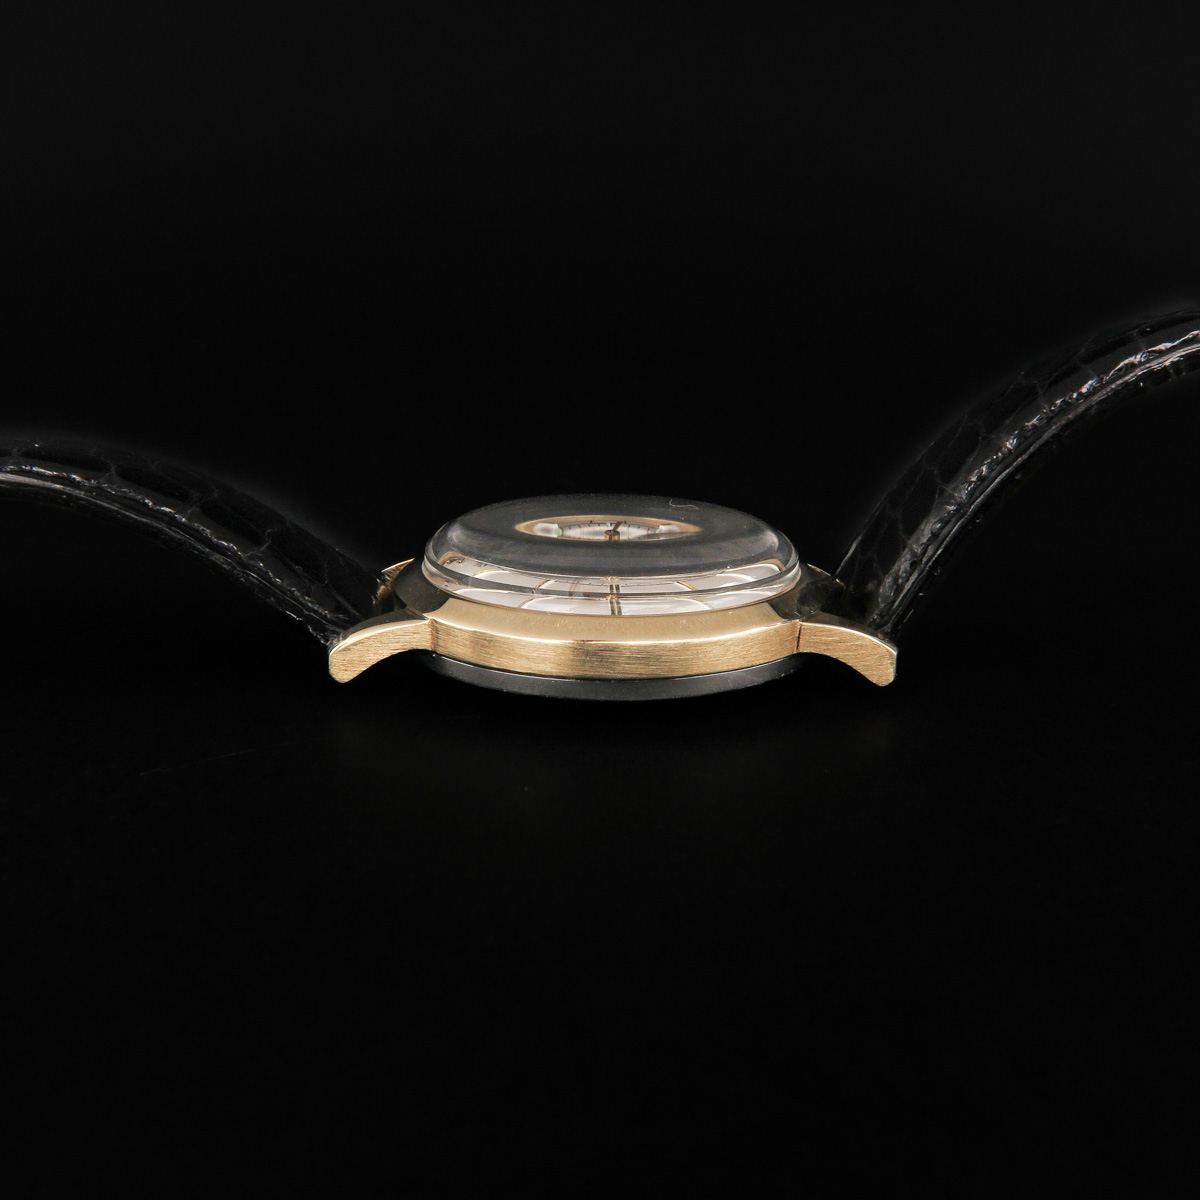 A Mens Jaeger-LeCoultre Watch - Image 6 of 10